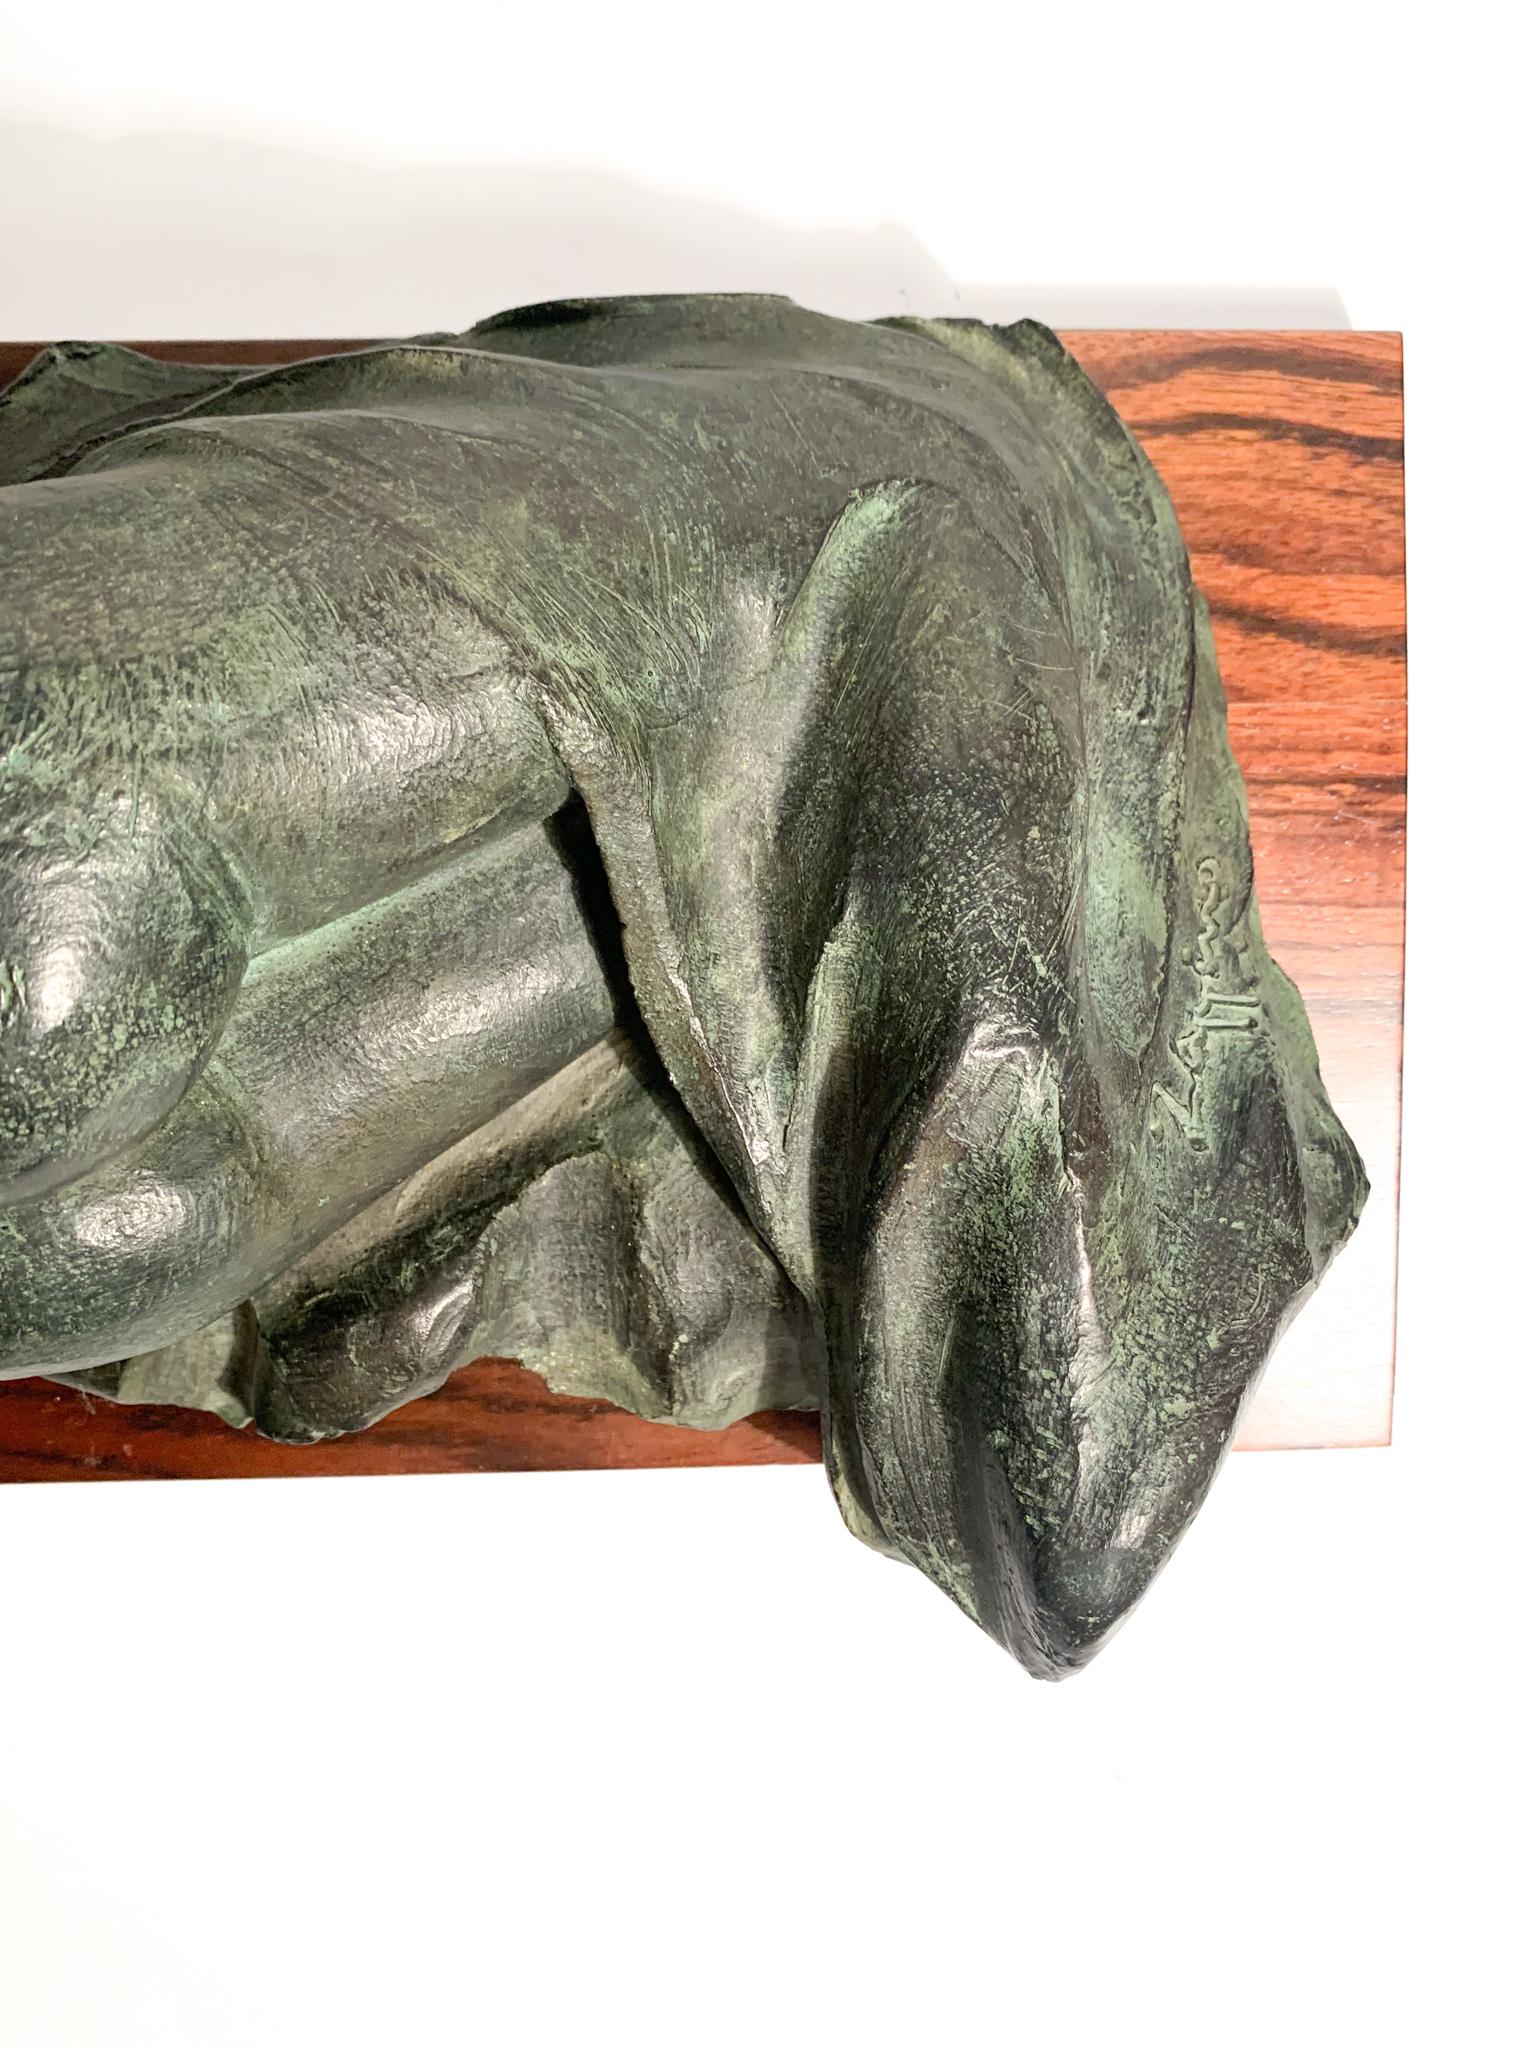 Mid-Century Modern Bronze Sculpture of a Female Nude by Michele Zappino from the 1990s For Sale